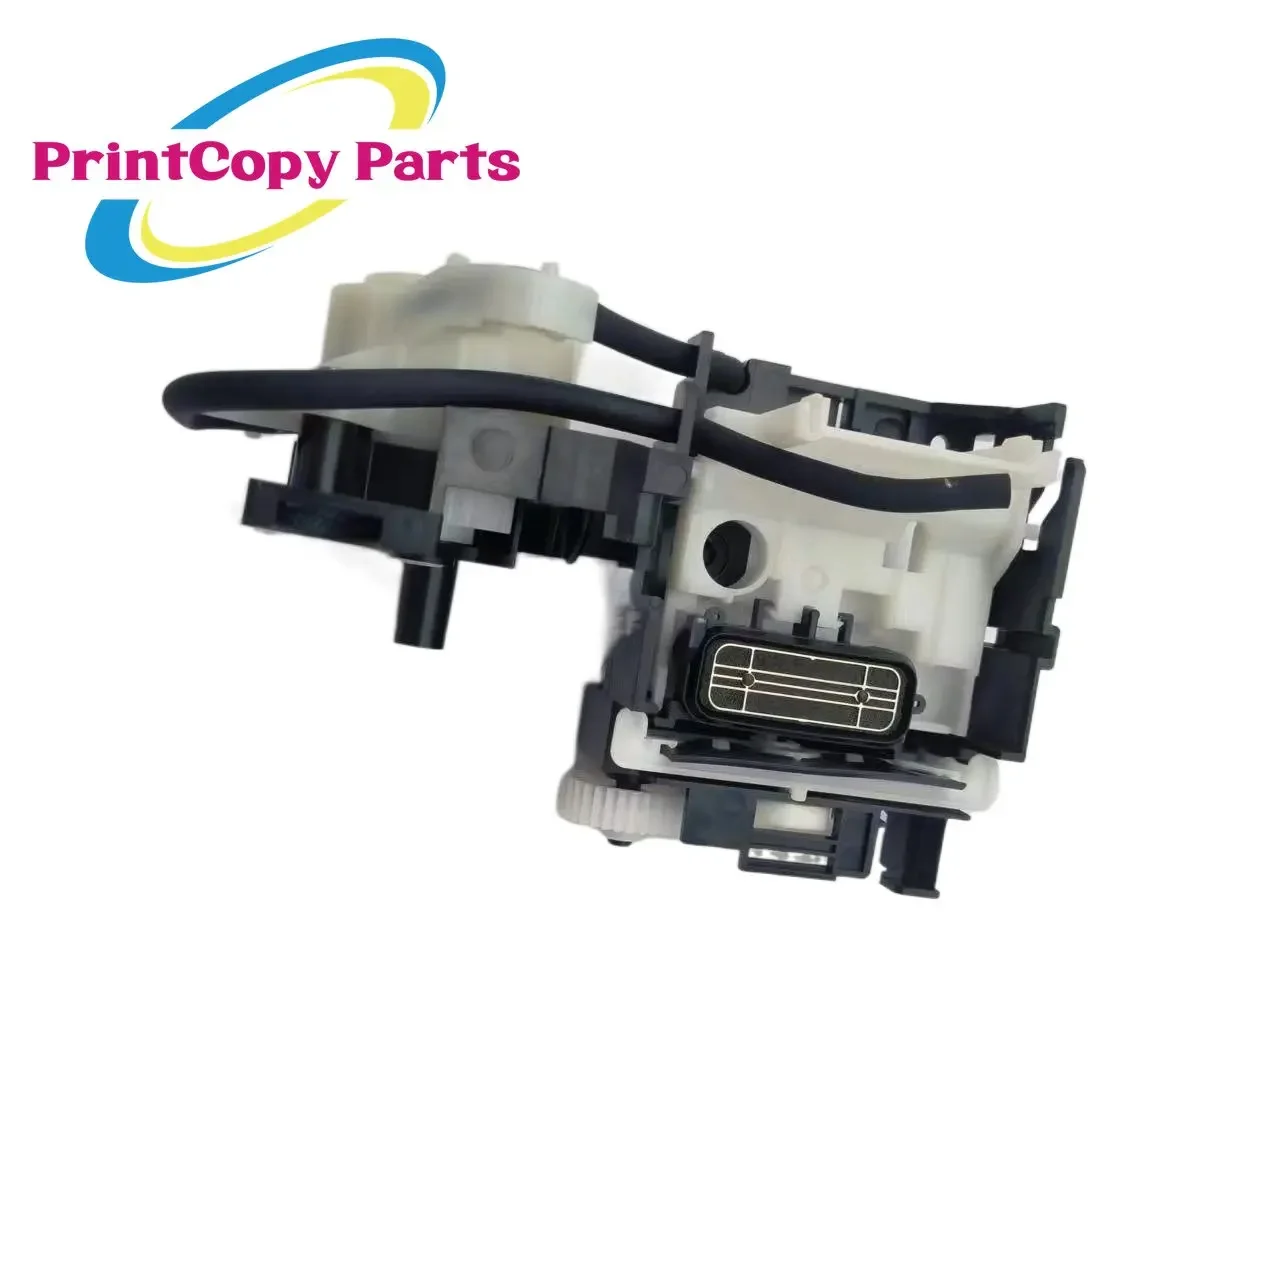 

10x Pump Ink System Capping Assy Cleaning Unit for Epson L1110 L3100 L3110 L3101 L3116 L3106 L3108 L3115 L3117 L3118 L3119 L3150